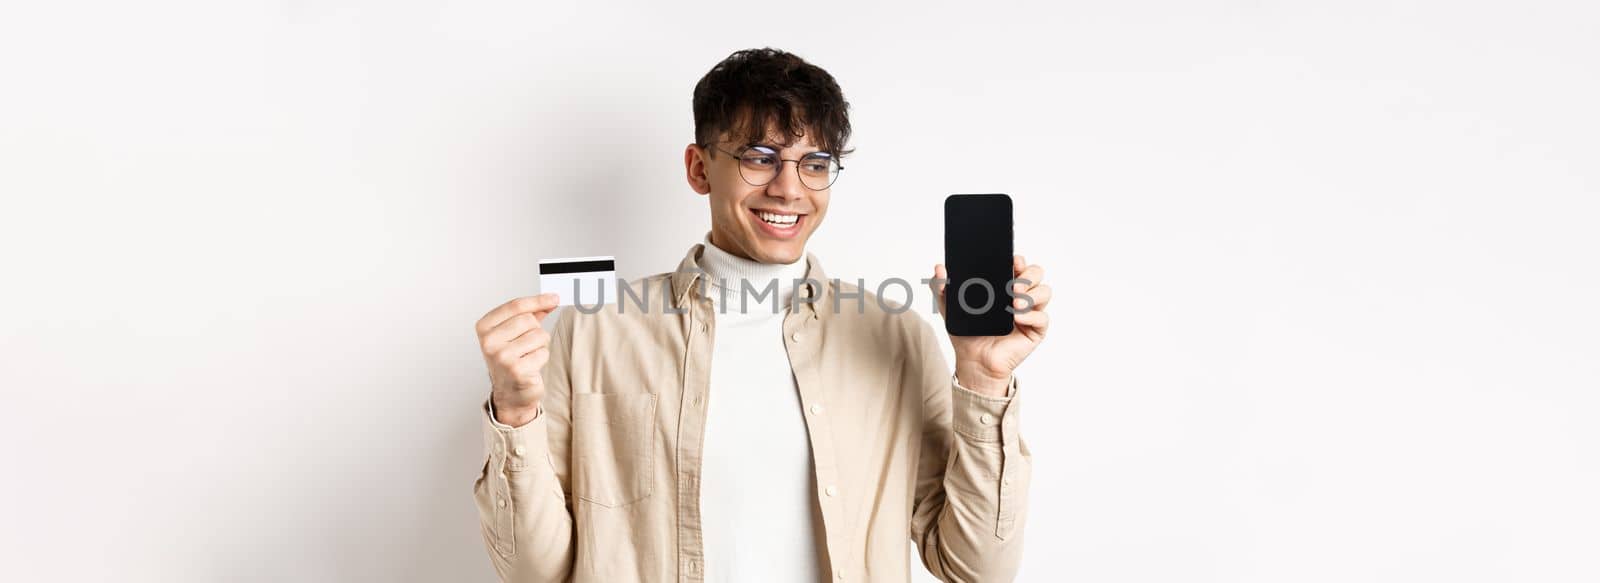 Online shopping. Handsome guy in glasses showing empty cellphone screen and credit card, smiling and looking at display pleased, standing on white background.